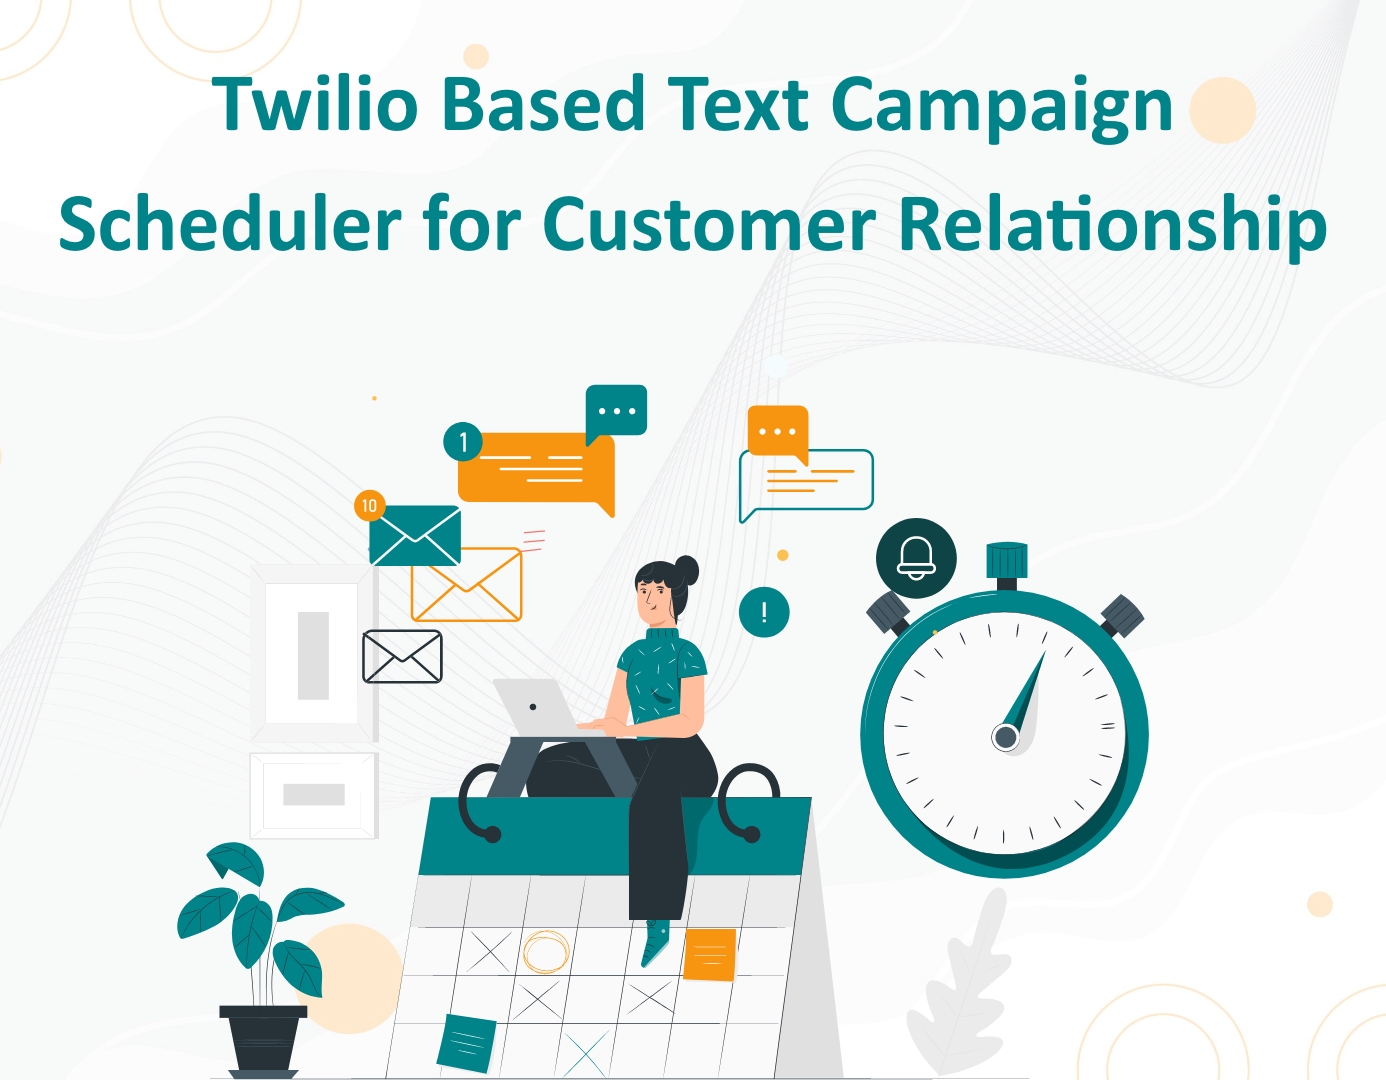 Twilio-powered text campaign scheduler empowering customer relationship management, enabling efficient communication and engagement